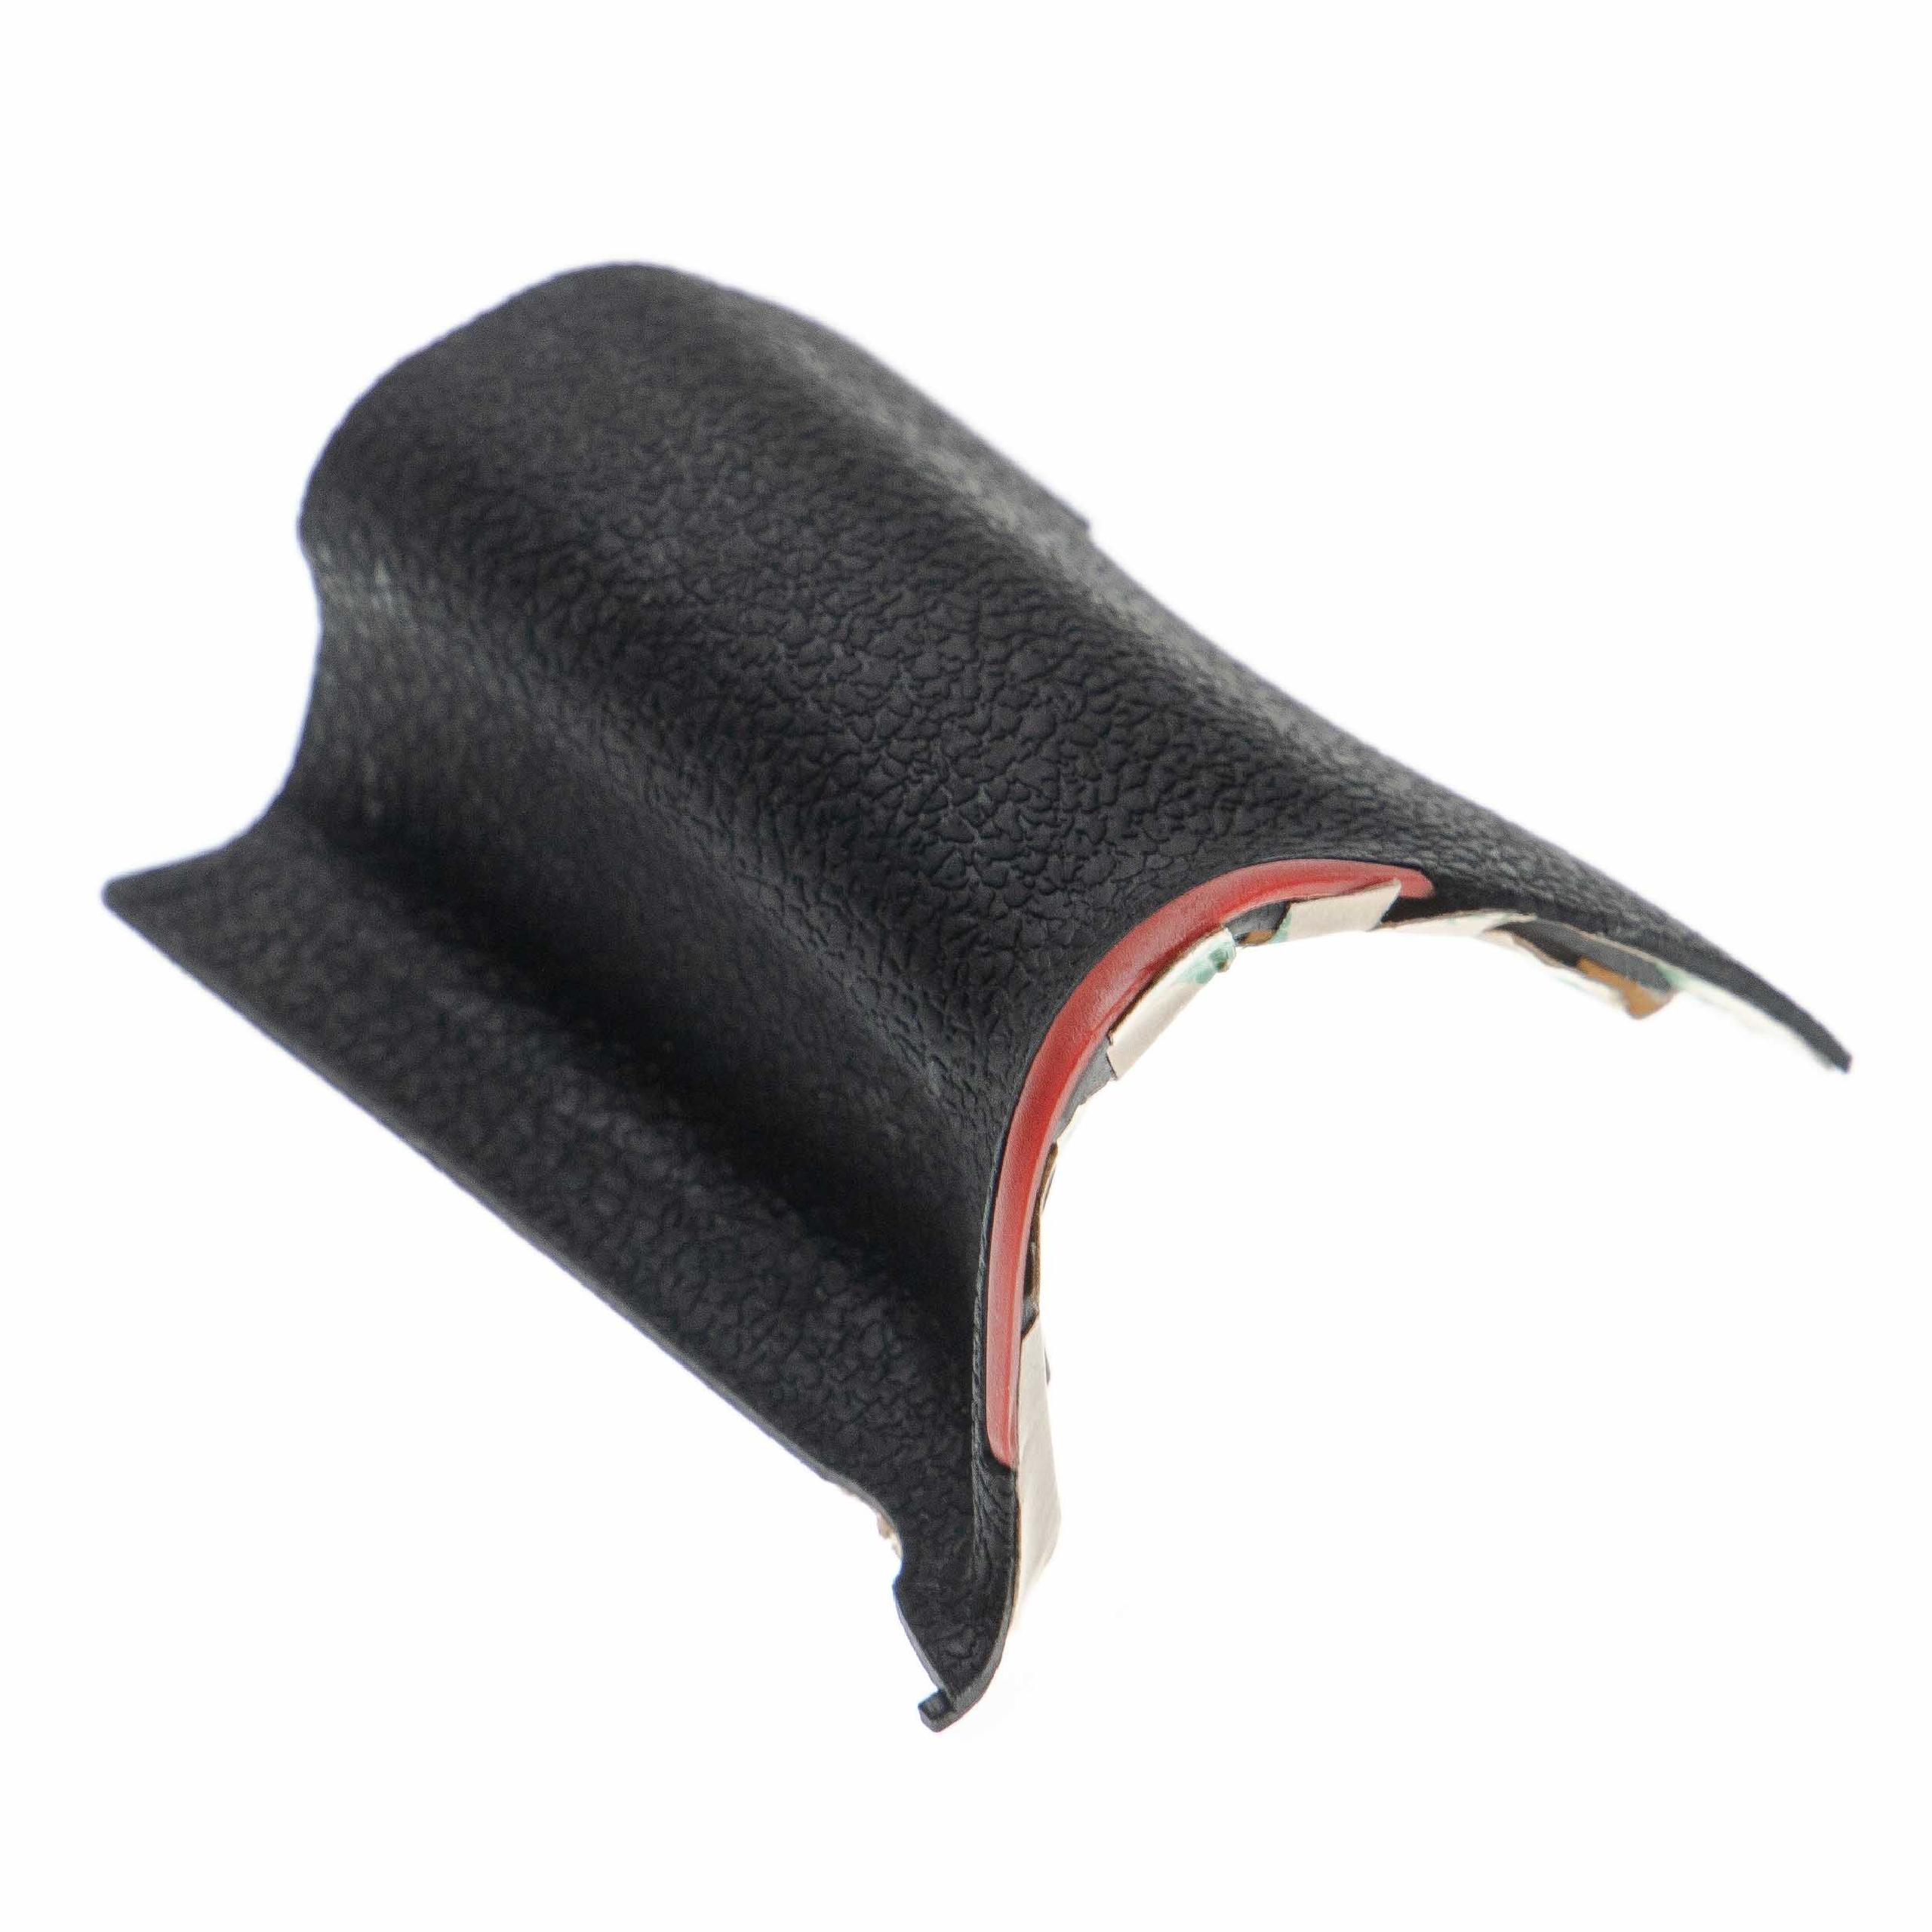 Rubber Grip Tape suitable for Nikon D750 Camera - Repair Part for Body Front, Self-Adhesive, Red Black